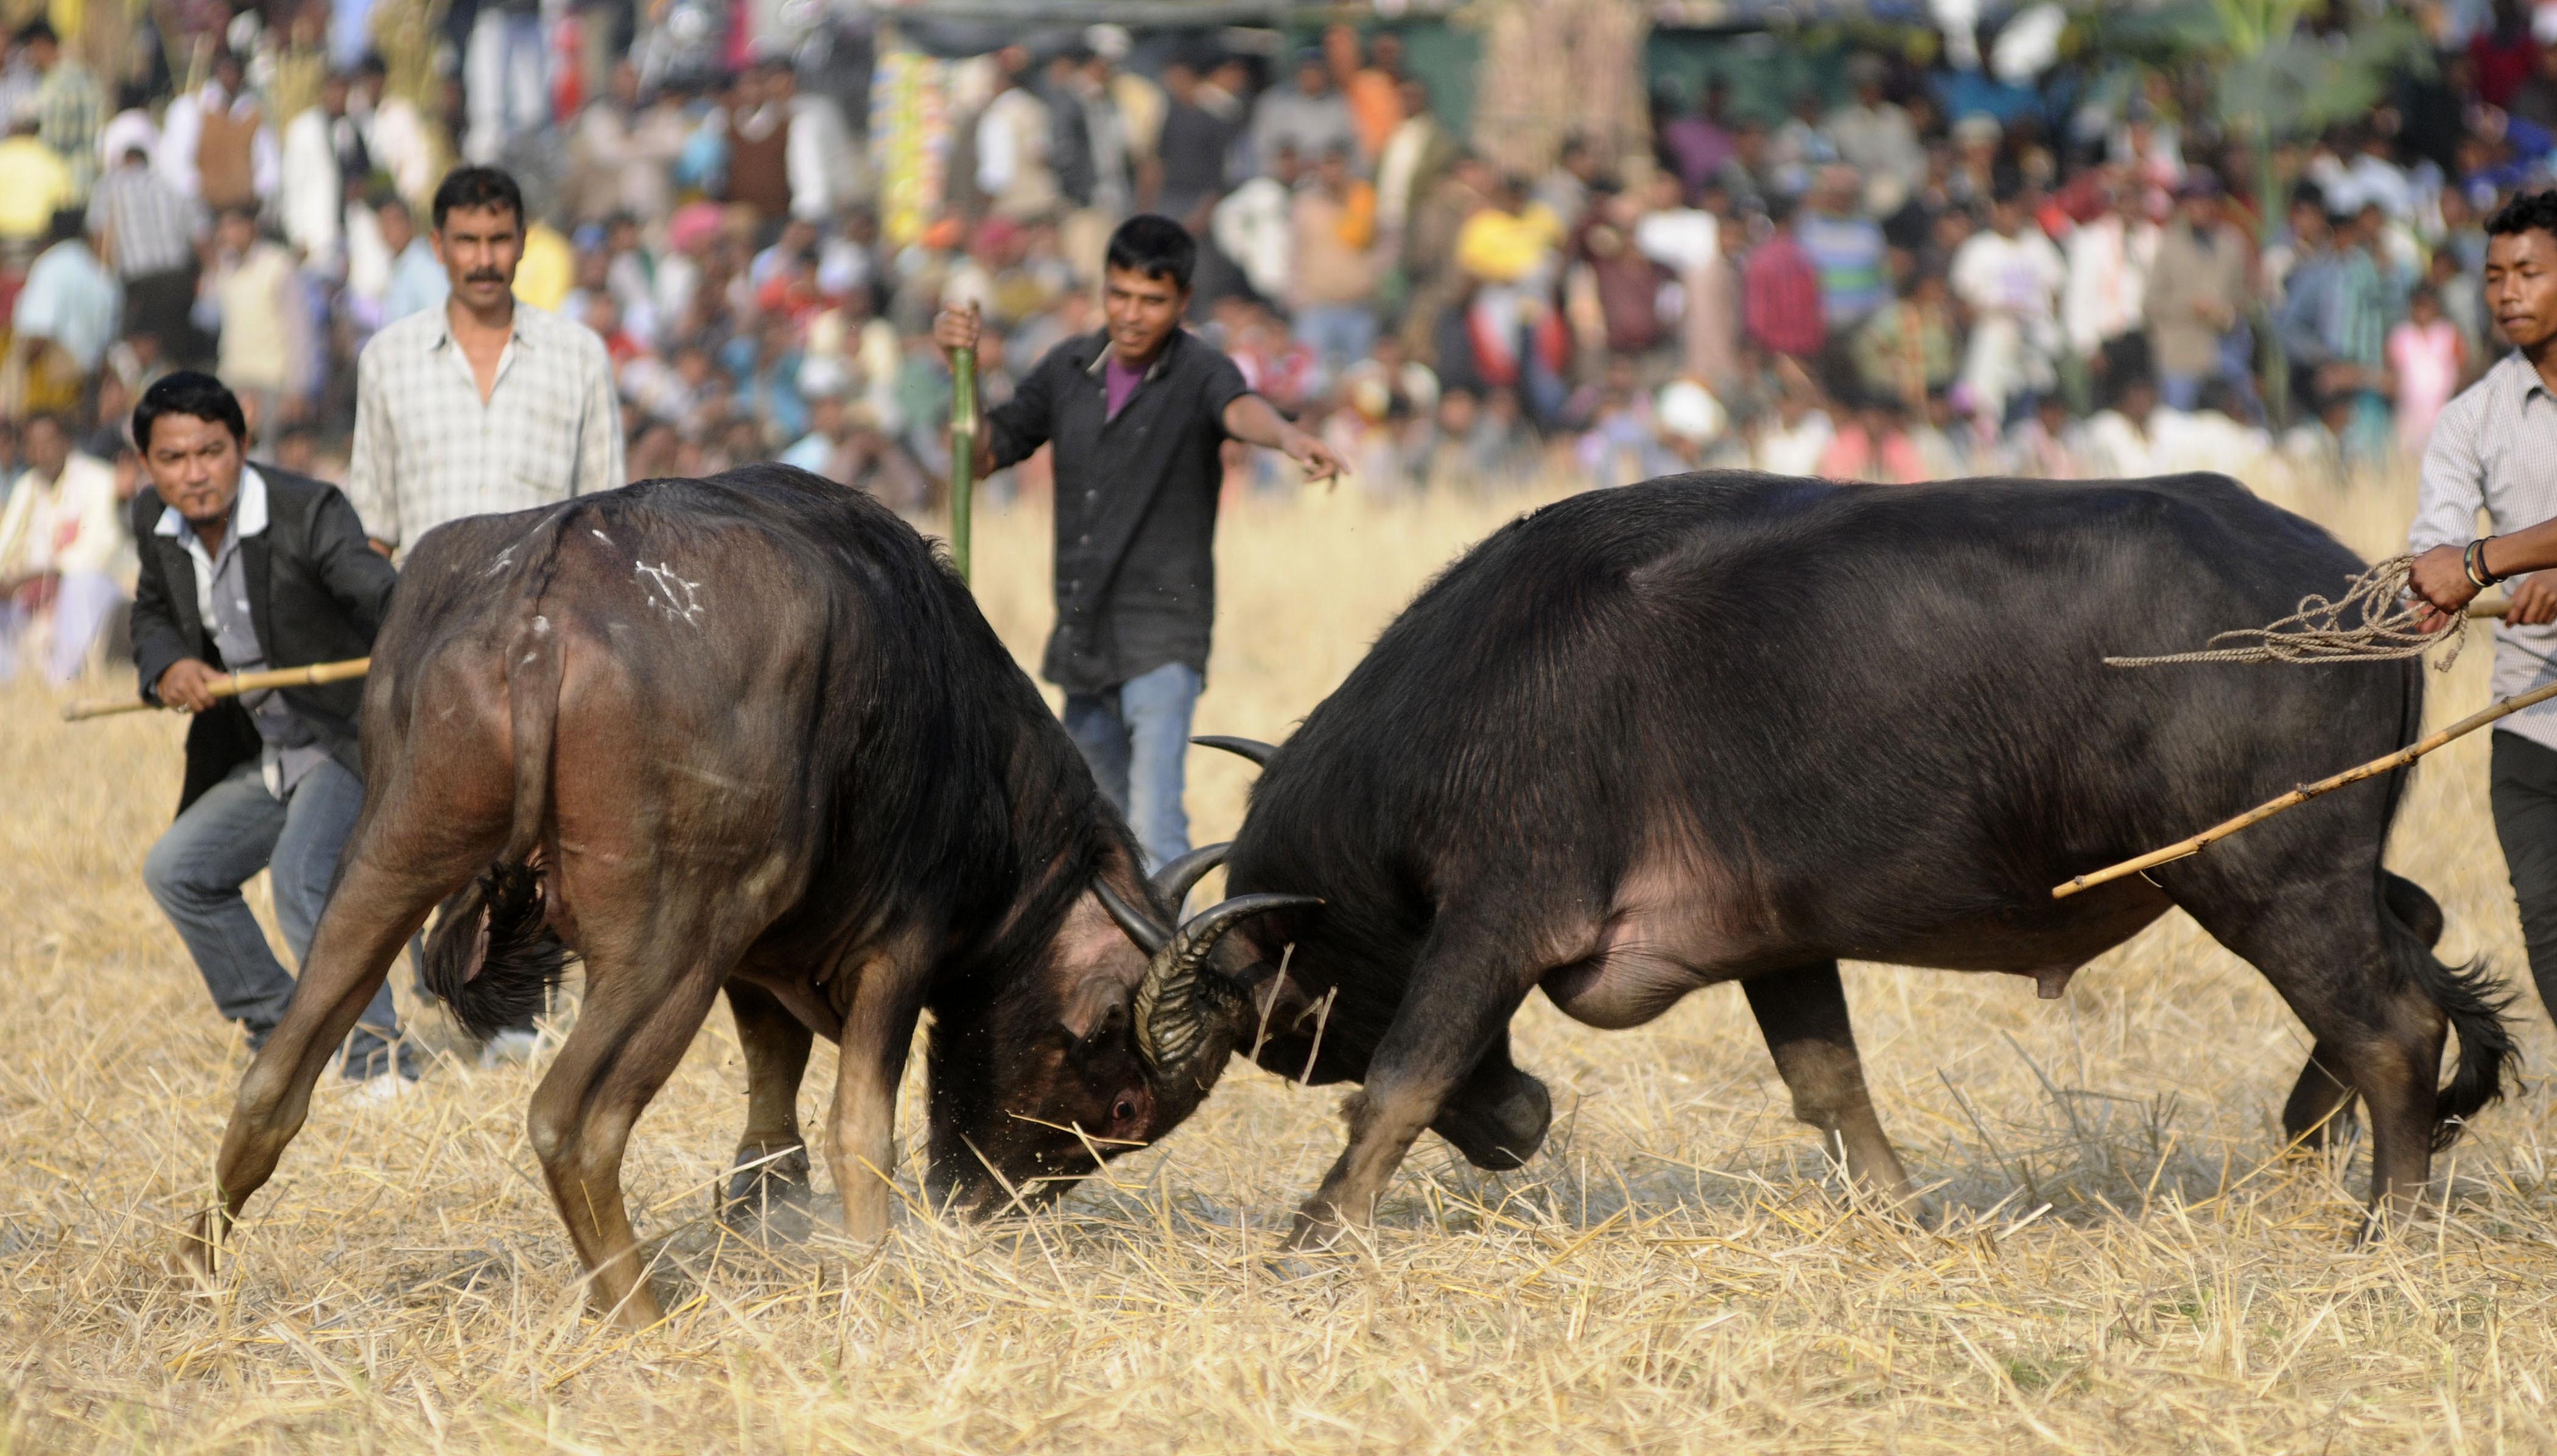 Indians watch a traditional buffalo fight in progress at Ahatguri, some 80 kms away from Guwahati, the capital city of Indias northeastern state of Assam on 15 January 2014. The age-old buffalo fight is organised on the occasion of the harvest festival 'Bhogali Bihu' in Assam. PHOTO/ Biju BORO